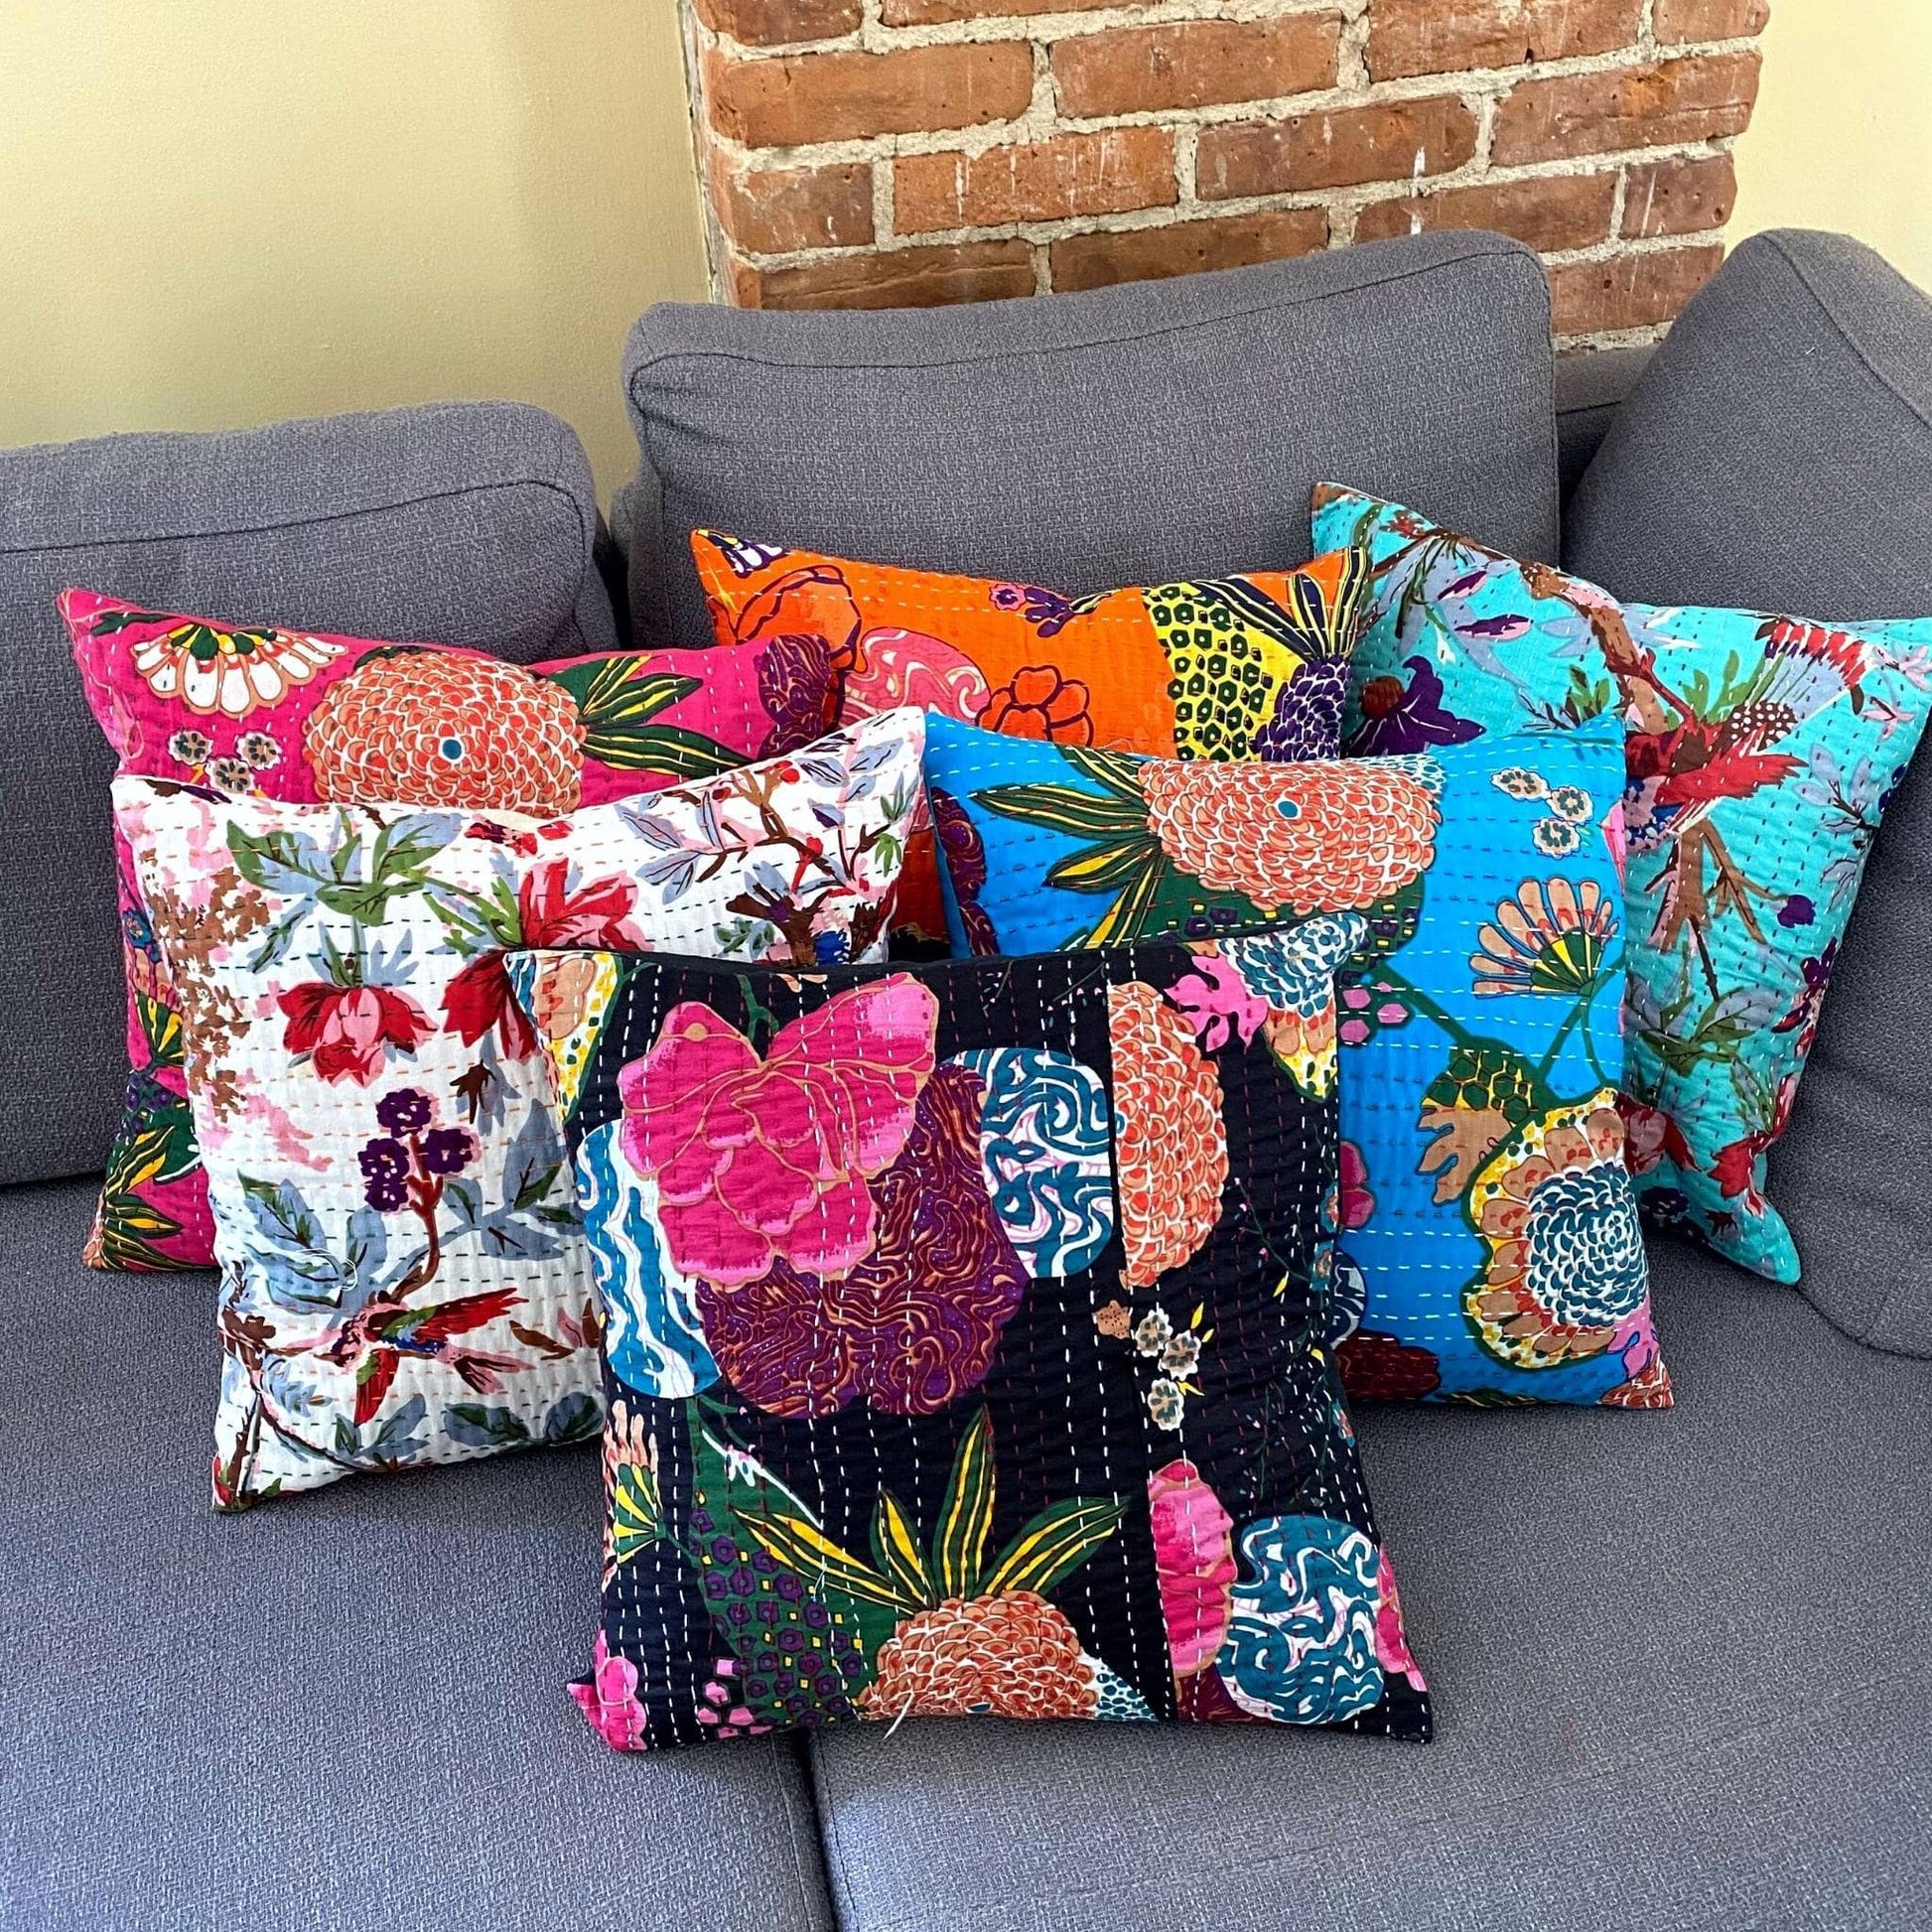 A pile of different Kantha pillow covers on a grey couch with a brick wall behind it.